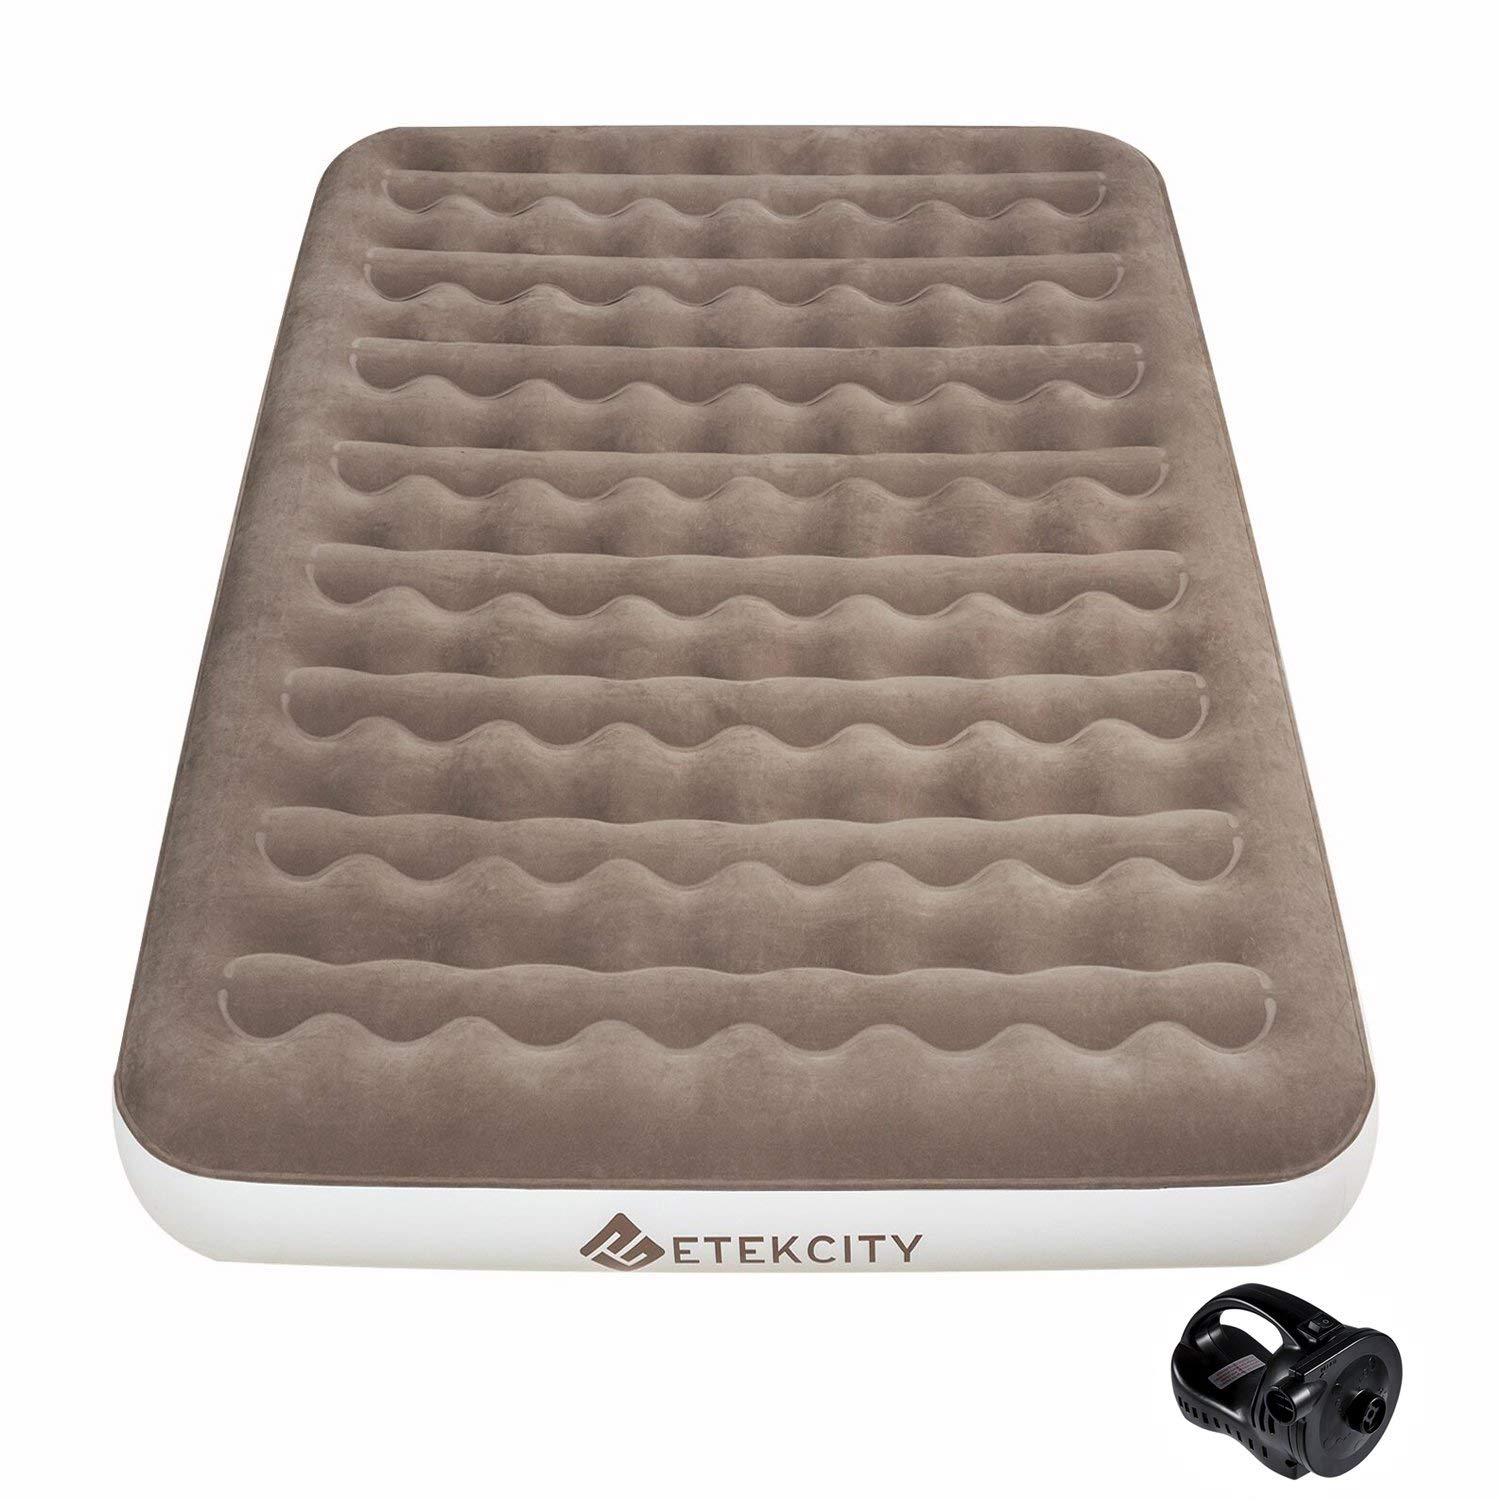 best air mattresses to use at home 2 Top 6 Best Rated Air Mattress 2022 - Home Air Mattresses Reviews